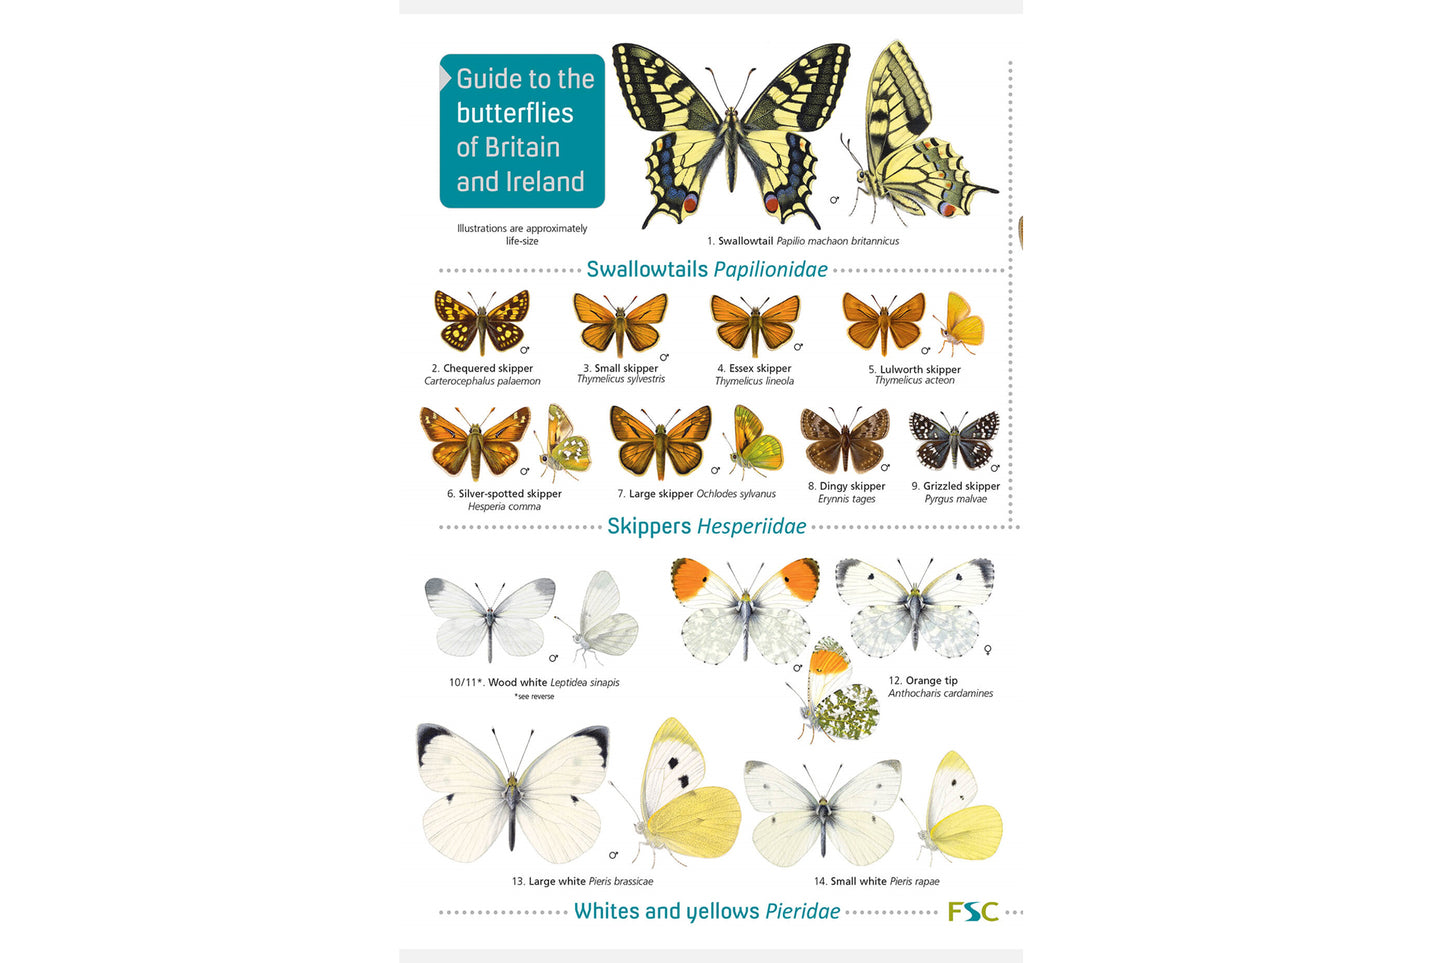 FSC Butterflies of Britain and Ireland Guide